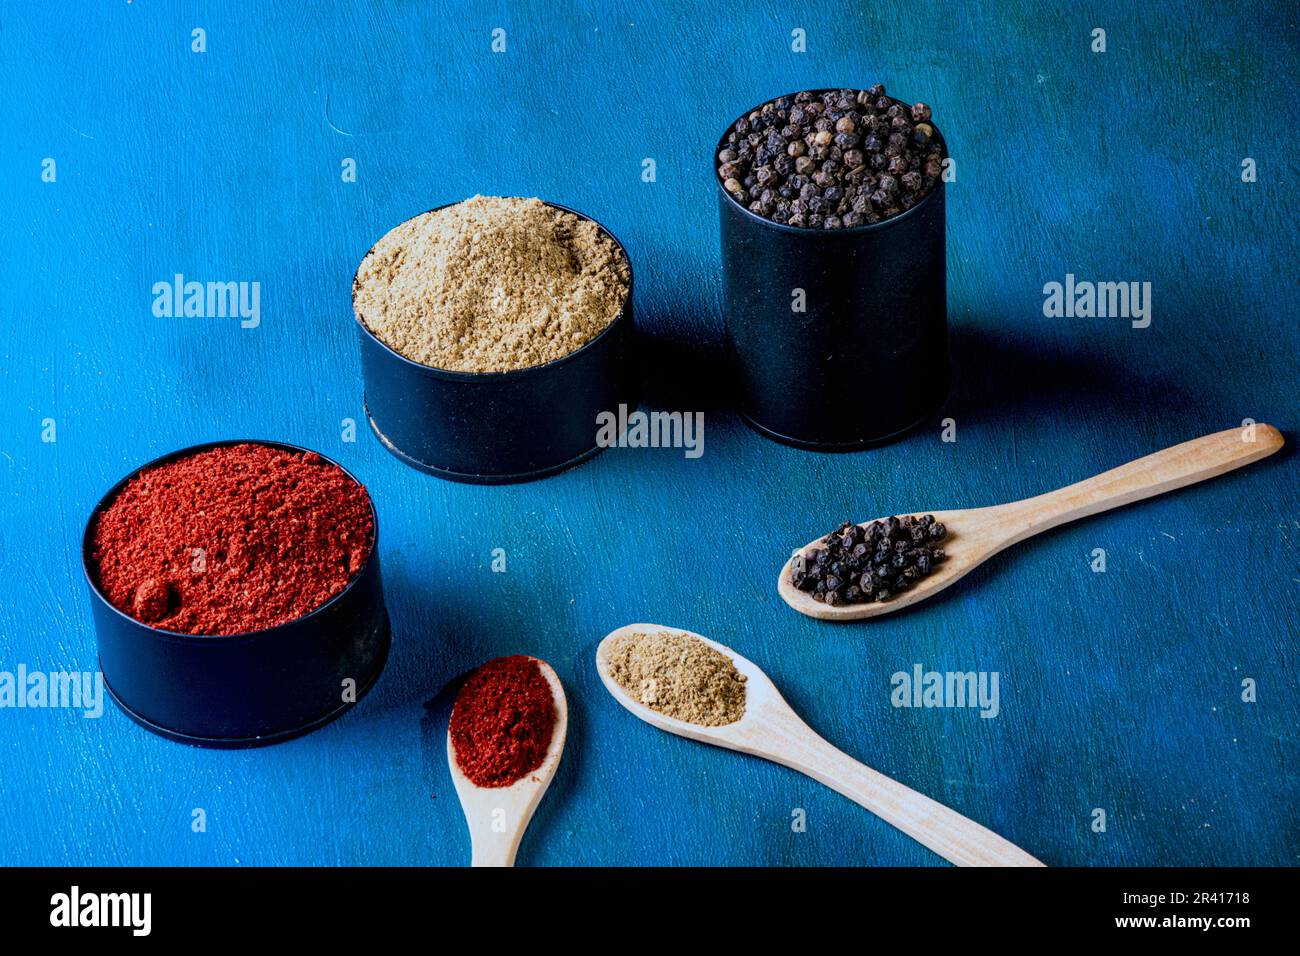 Tin cans and wooden spoons, filled with spices on a hand-painted blue background. With copy space Stock Photo